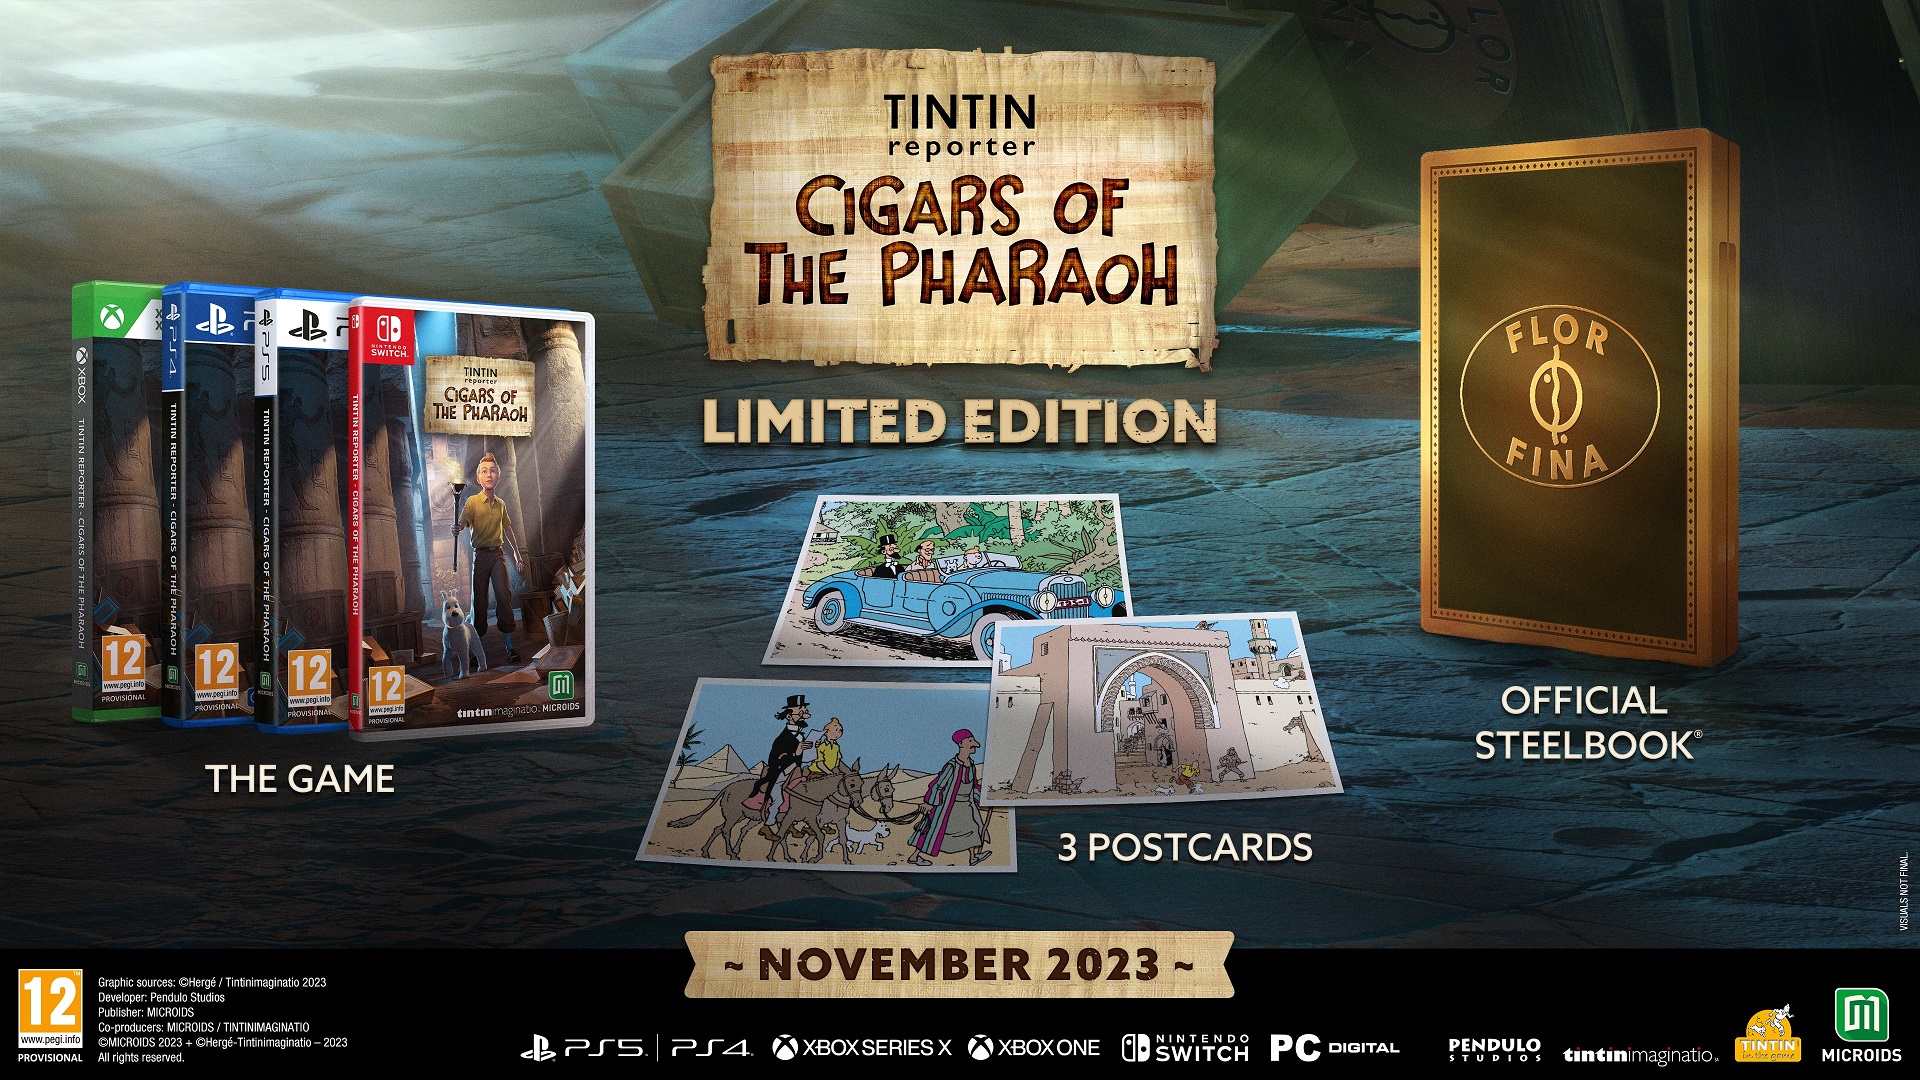 Tintin Reporter: Cigars of The Pharaoh - Limited Edition